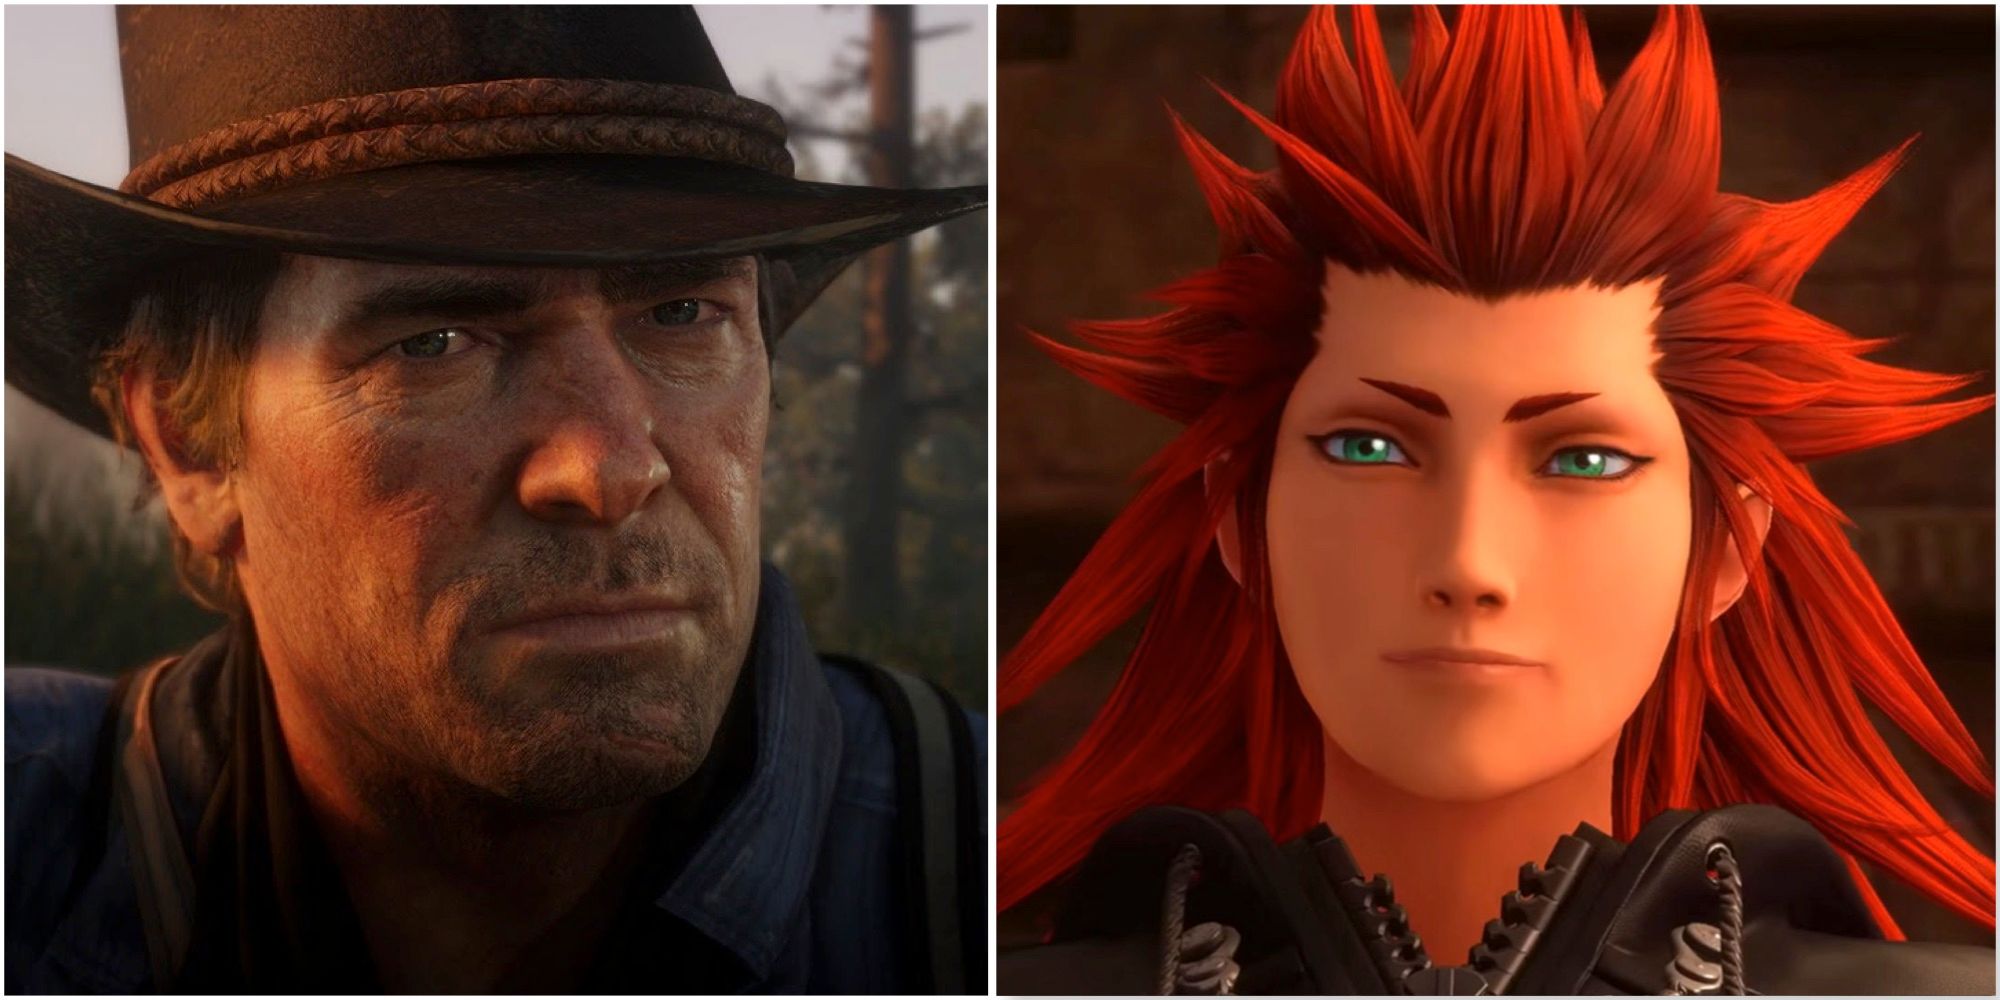 Arthur Morgan from Red Dead Redemption 2 and Axel from Kingdom Hearts 3